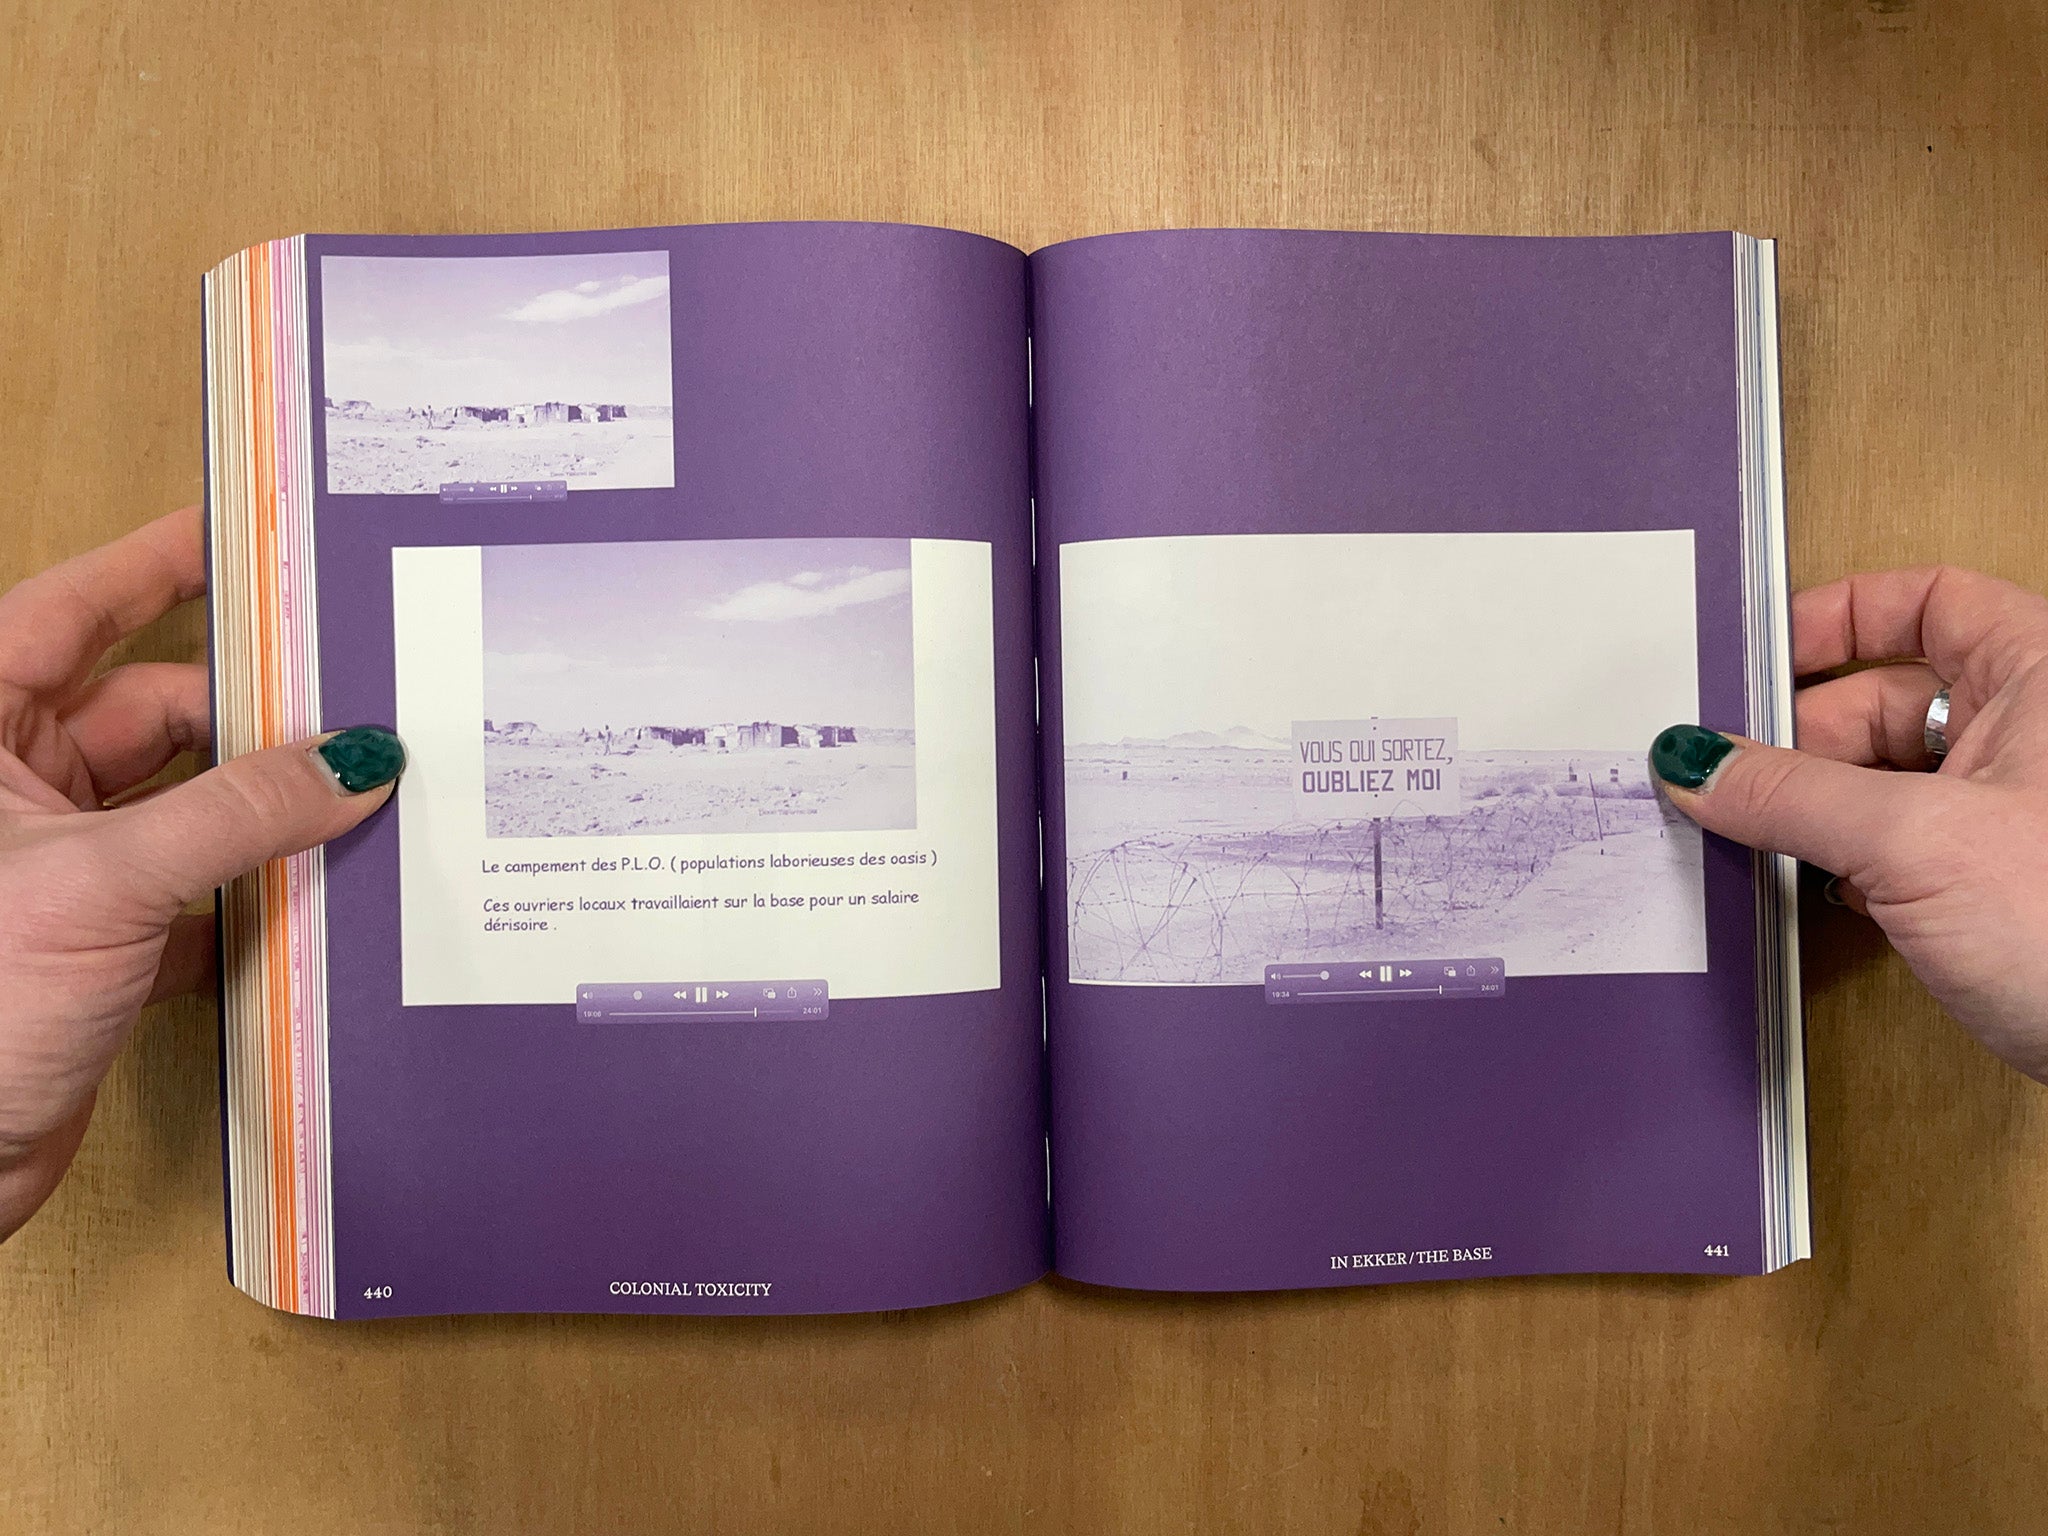 COLONIAL TOXICITY: REHEARSING FRENCH RADIOACTIVE ARCHITECTURE AND LANDSCAPE IN THE SAHARA by Samia Henni